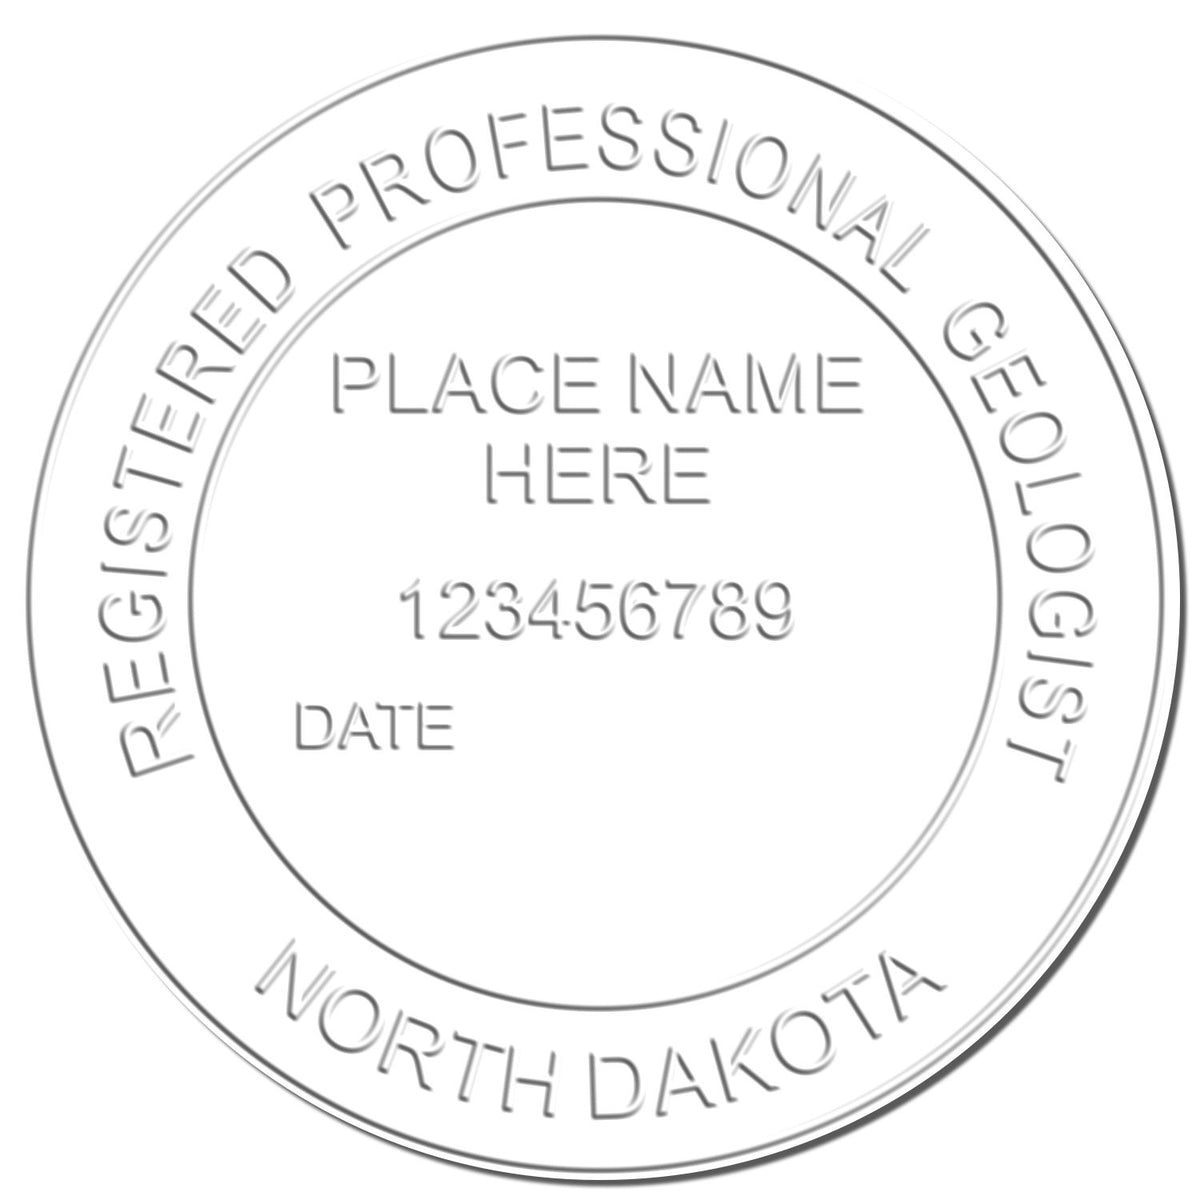 The North Dakota Geologist Desk Seal stamp impression comes to life with a crisp, detailed image stamped on paper - showcasing true professional quality.